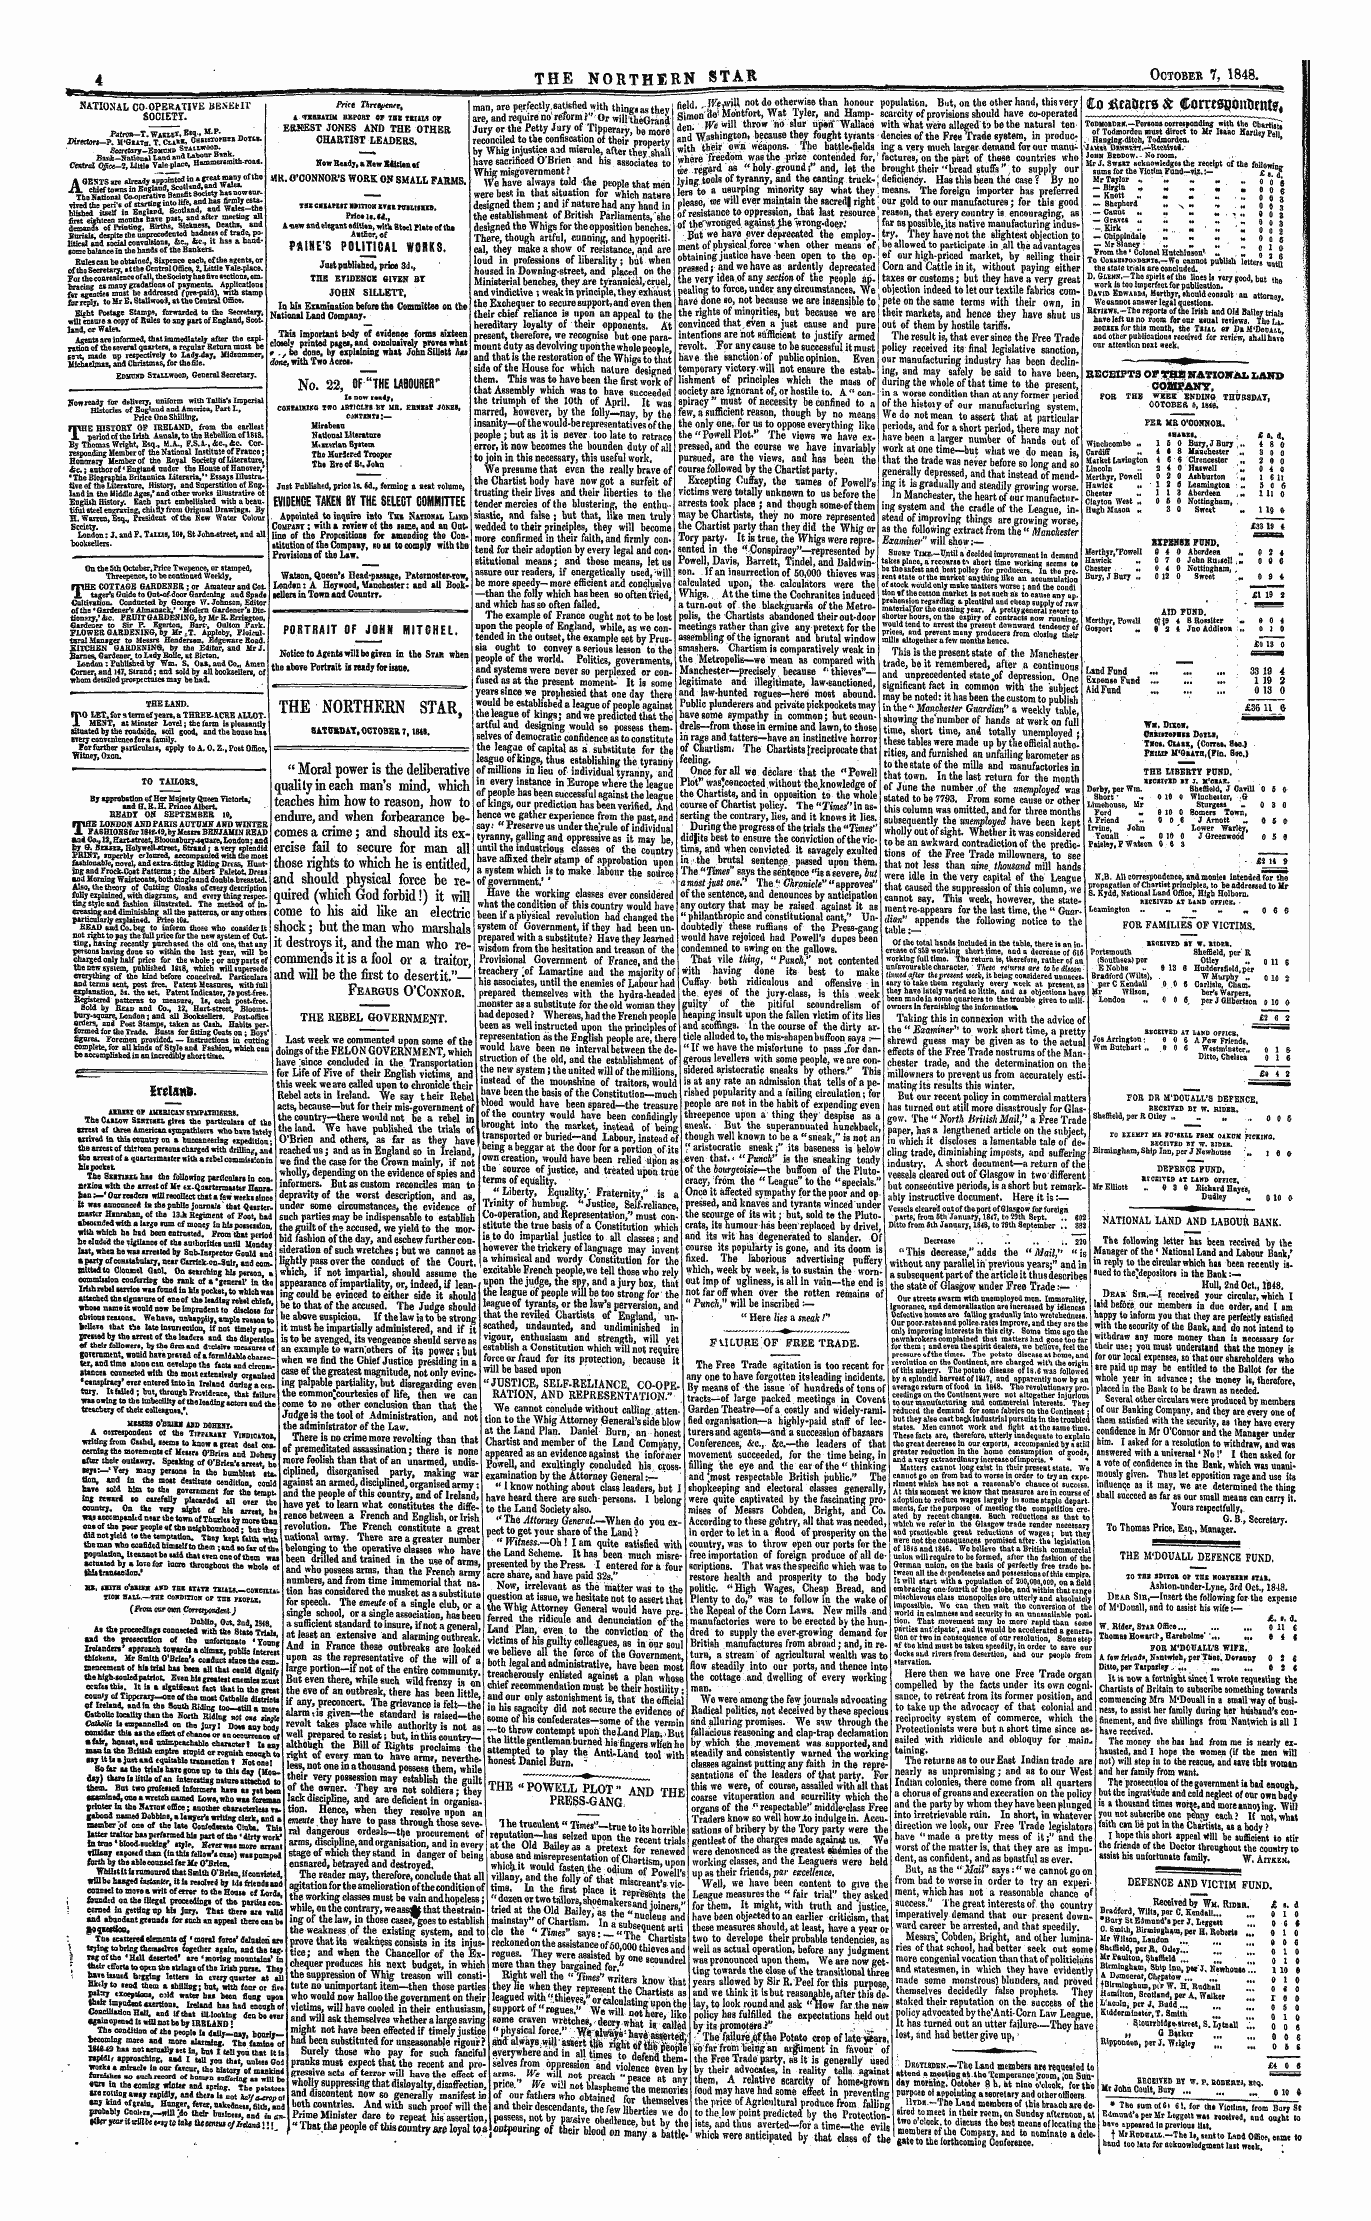 Northern Star (1837-1852): jS F Y, 1st edition - The Northern Star , B1tcrdat, October 7 ,1mb.